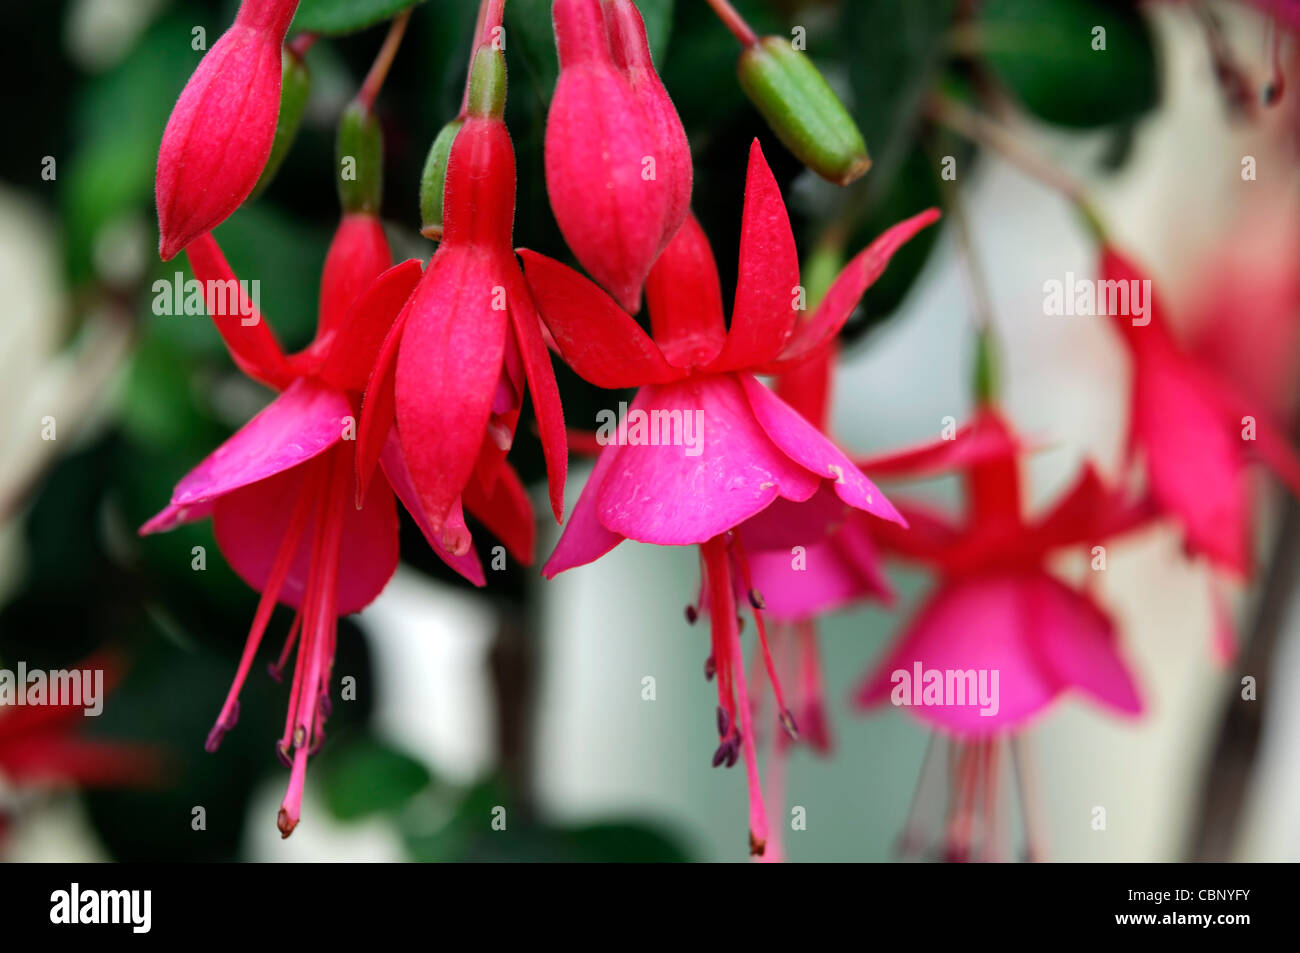 Fuchsia Display small deciduous shrub single flowers tube recurved sepals deep-pink corolla petals rose-pink flowers blooms Stock Photo